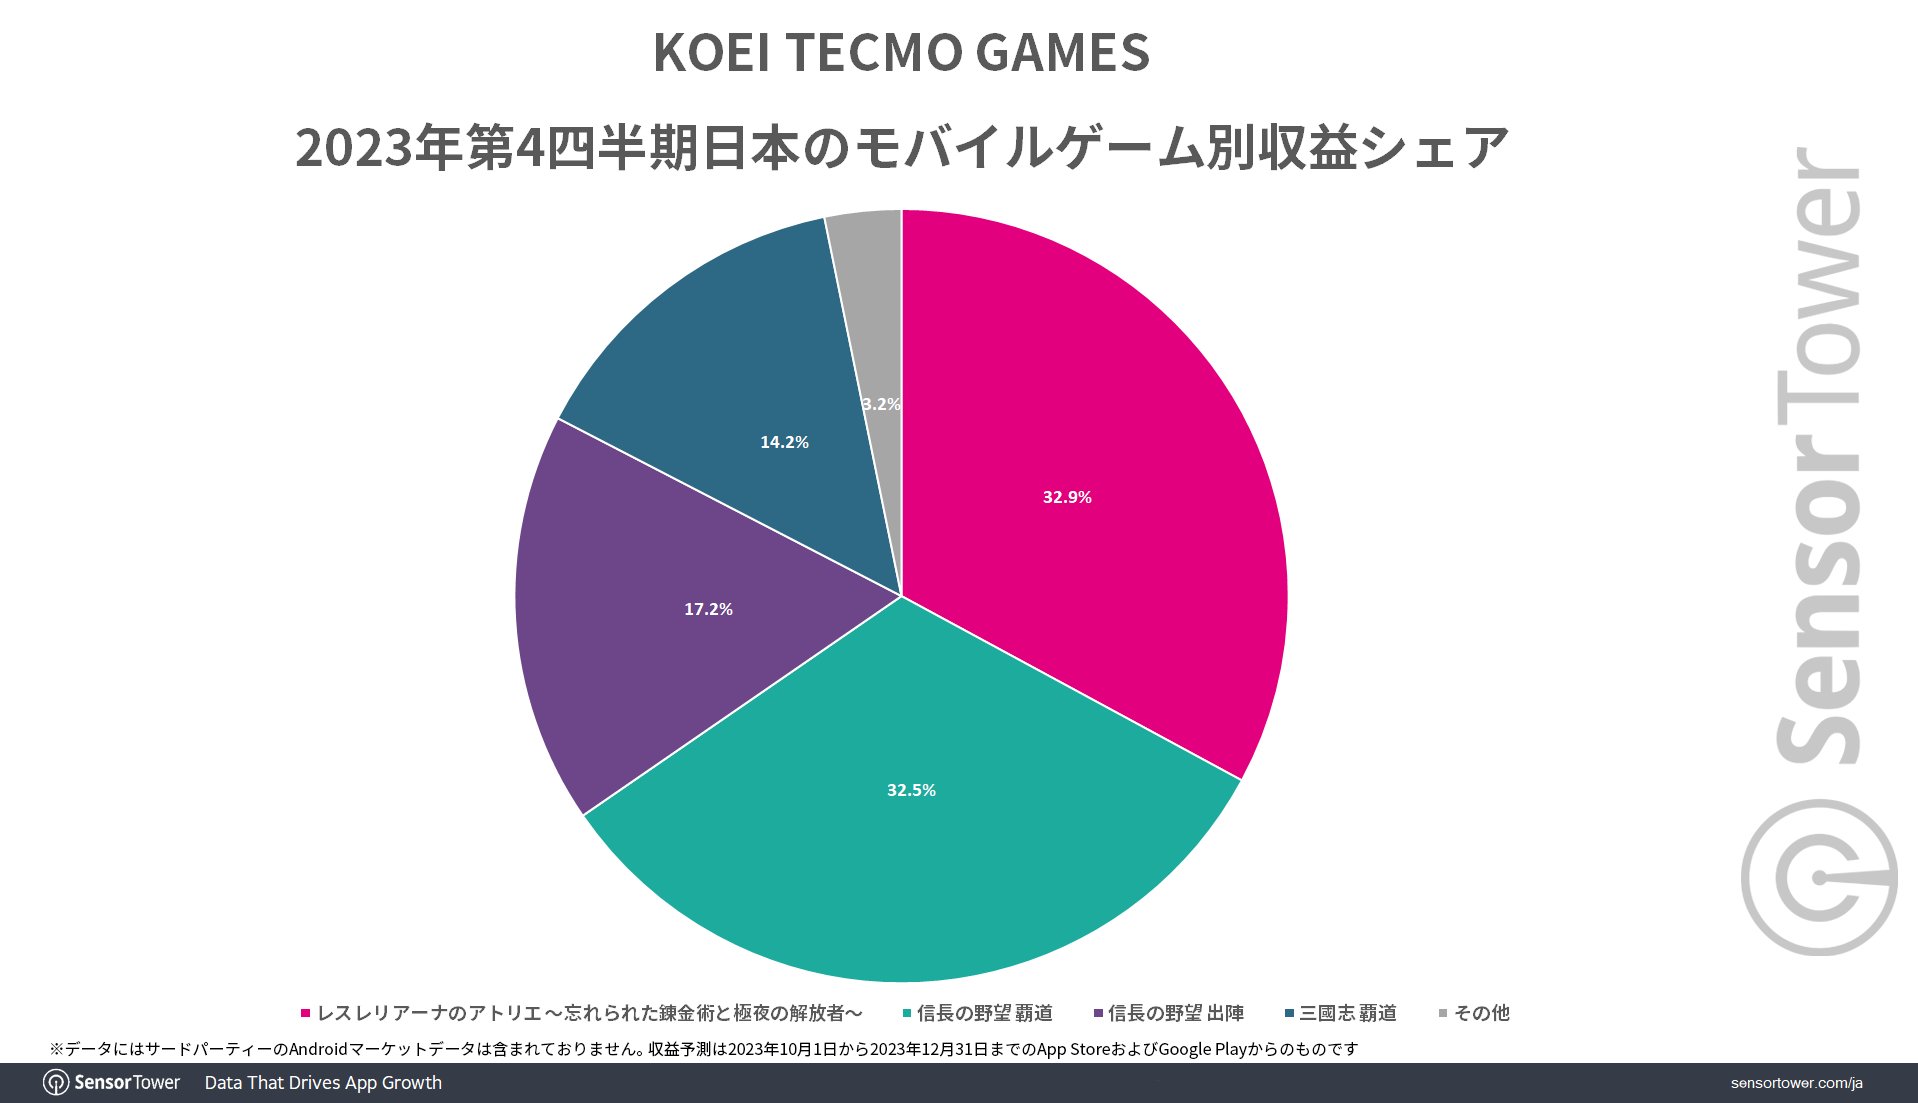 Revenue-Share-by-Game-2023Q4-KOEI